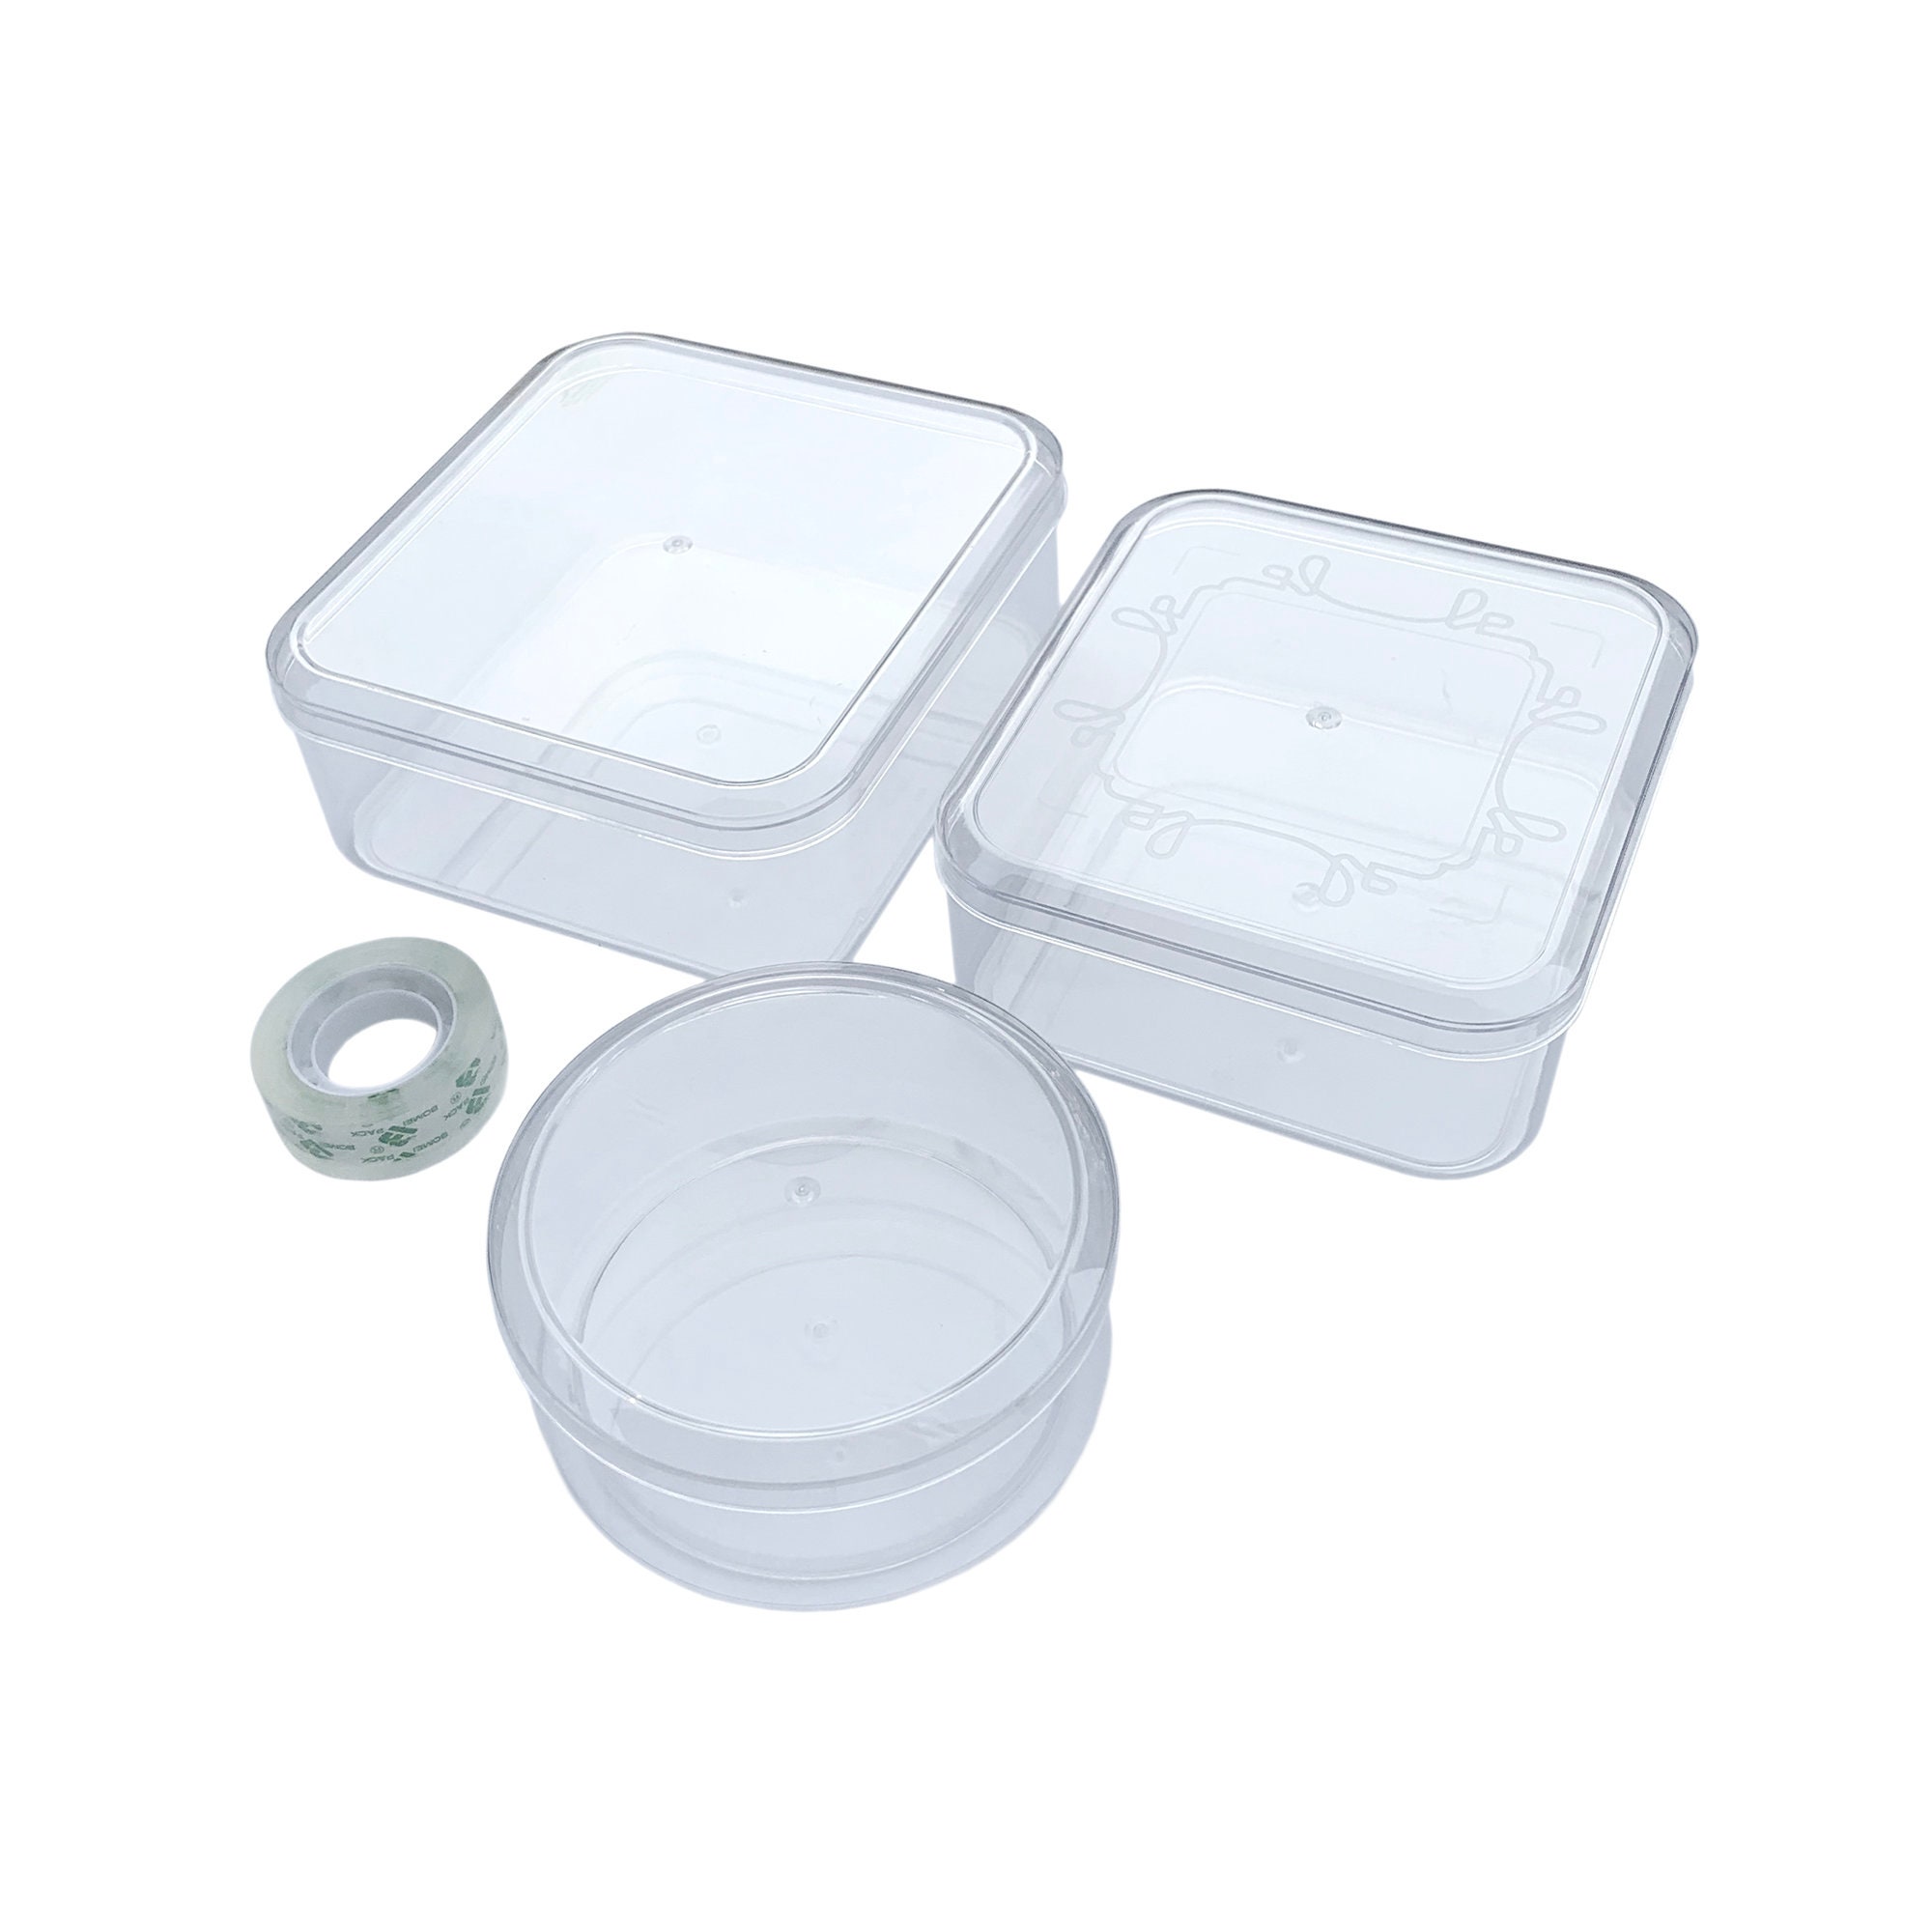 Plastic Containers With Lids for Candy Cookies Desserts Bake 